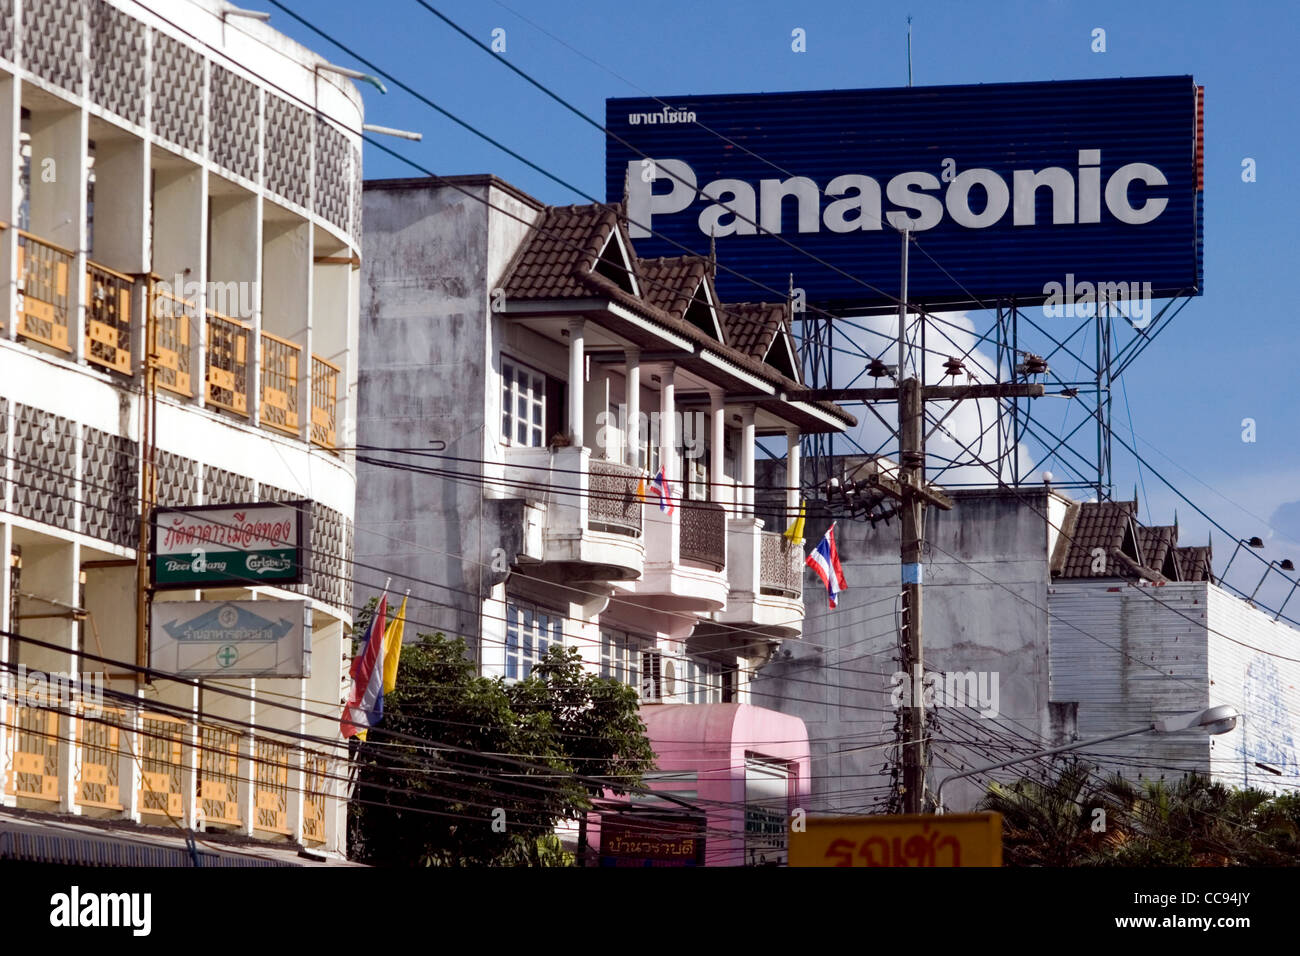 A large Panasonic sign is on display high above urban housing on a city street in Chiang Rai, Thailand. Stock Photo